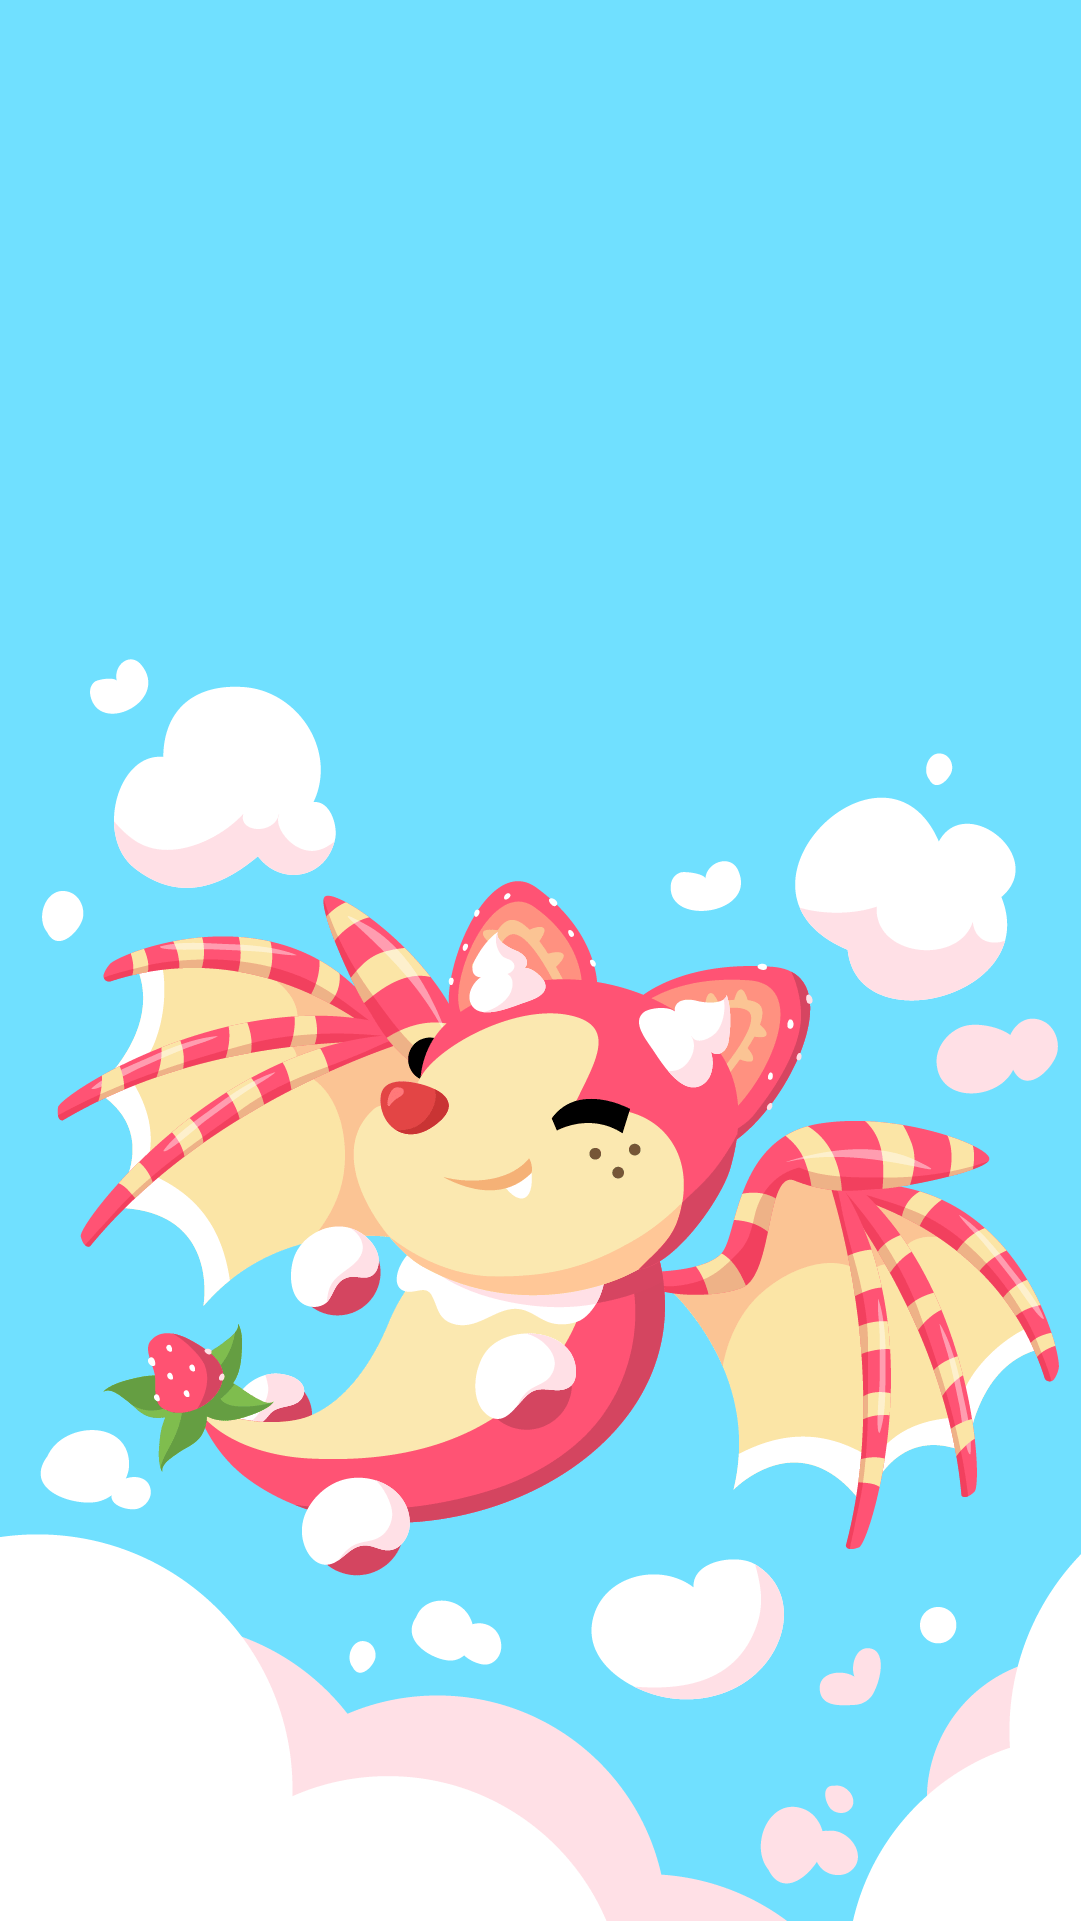 A pink fox with a pink heart on its nose and a pink checkered scarf around its neck, flying through the sky with clouds and holding a pink flower in its mouth. - Dragon